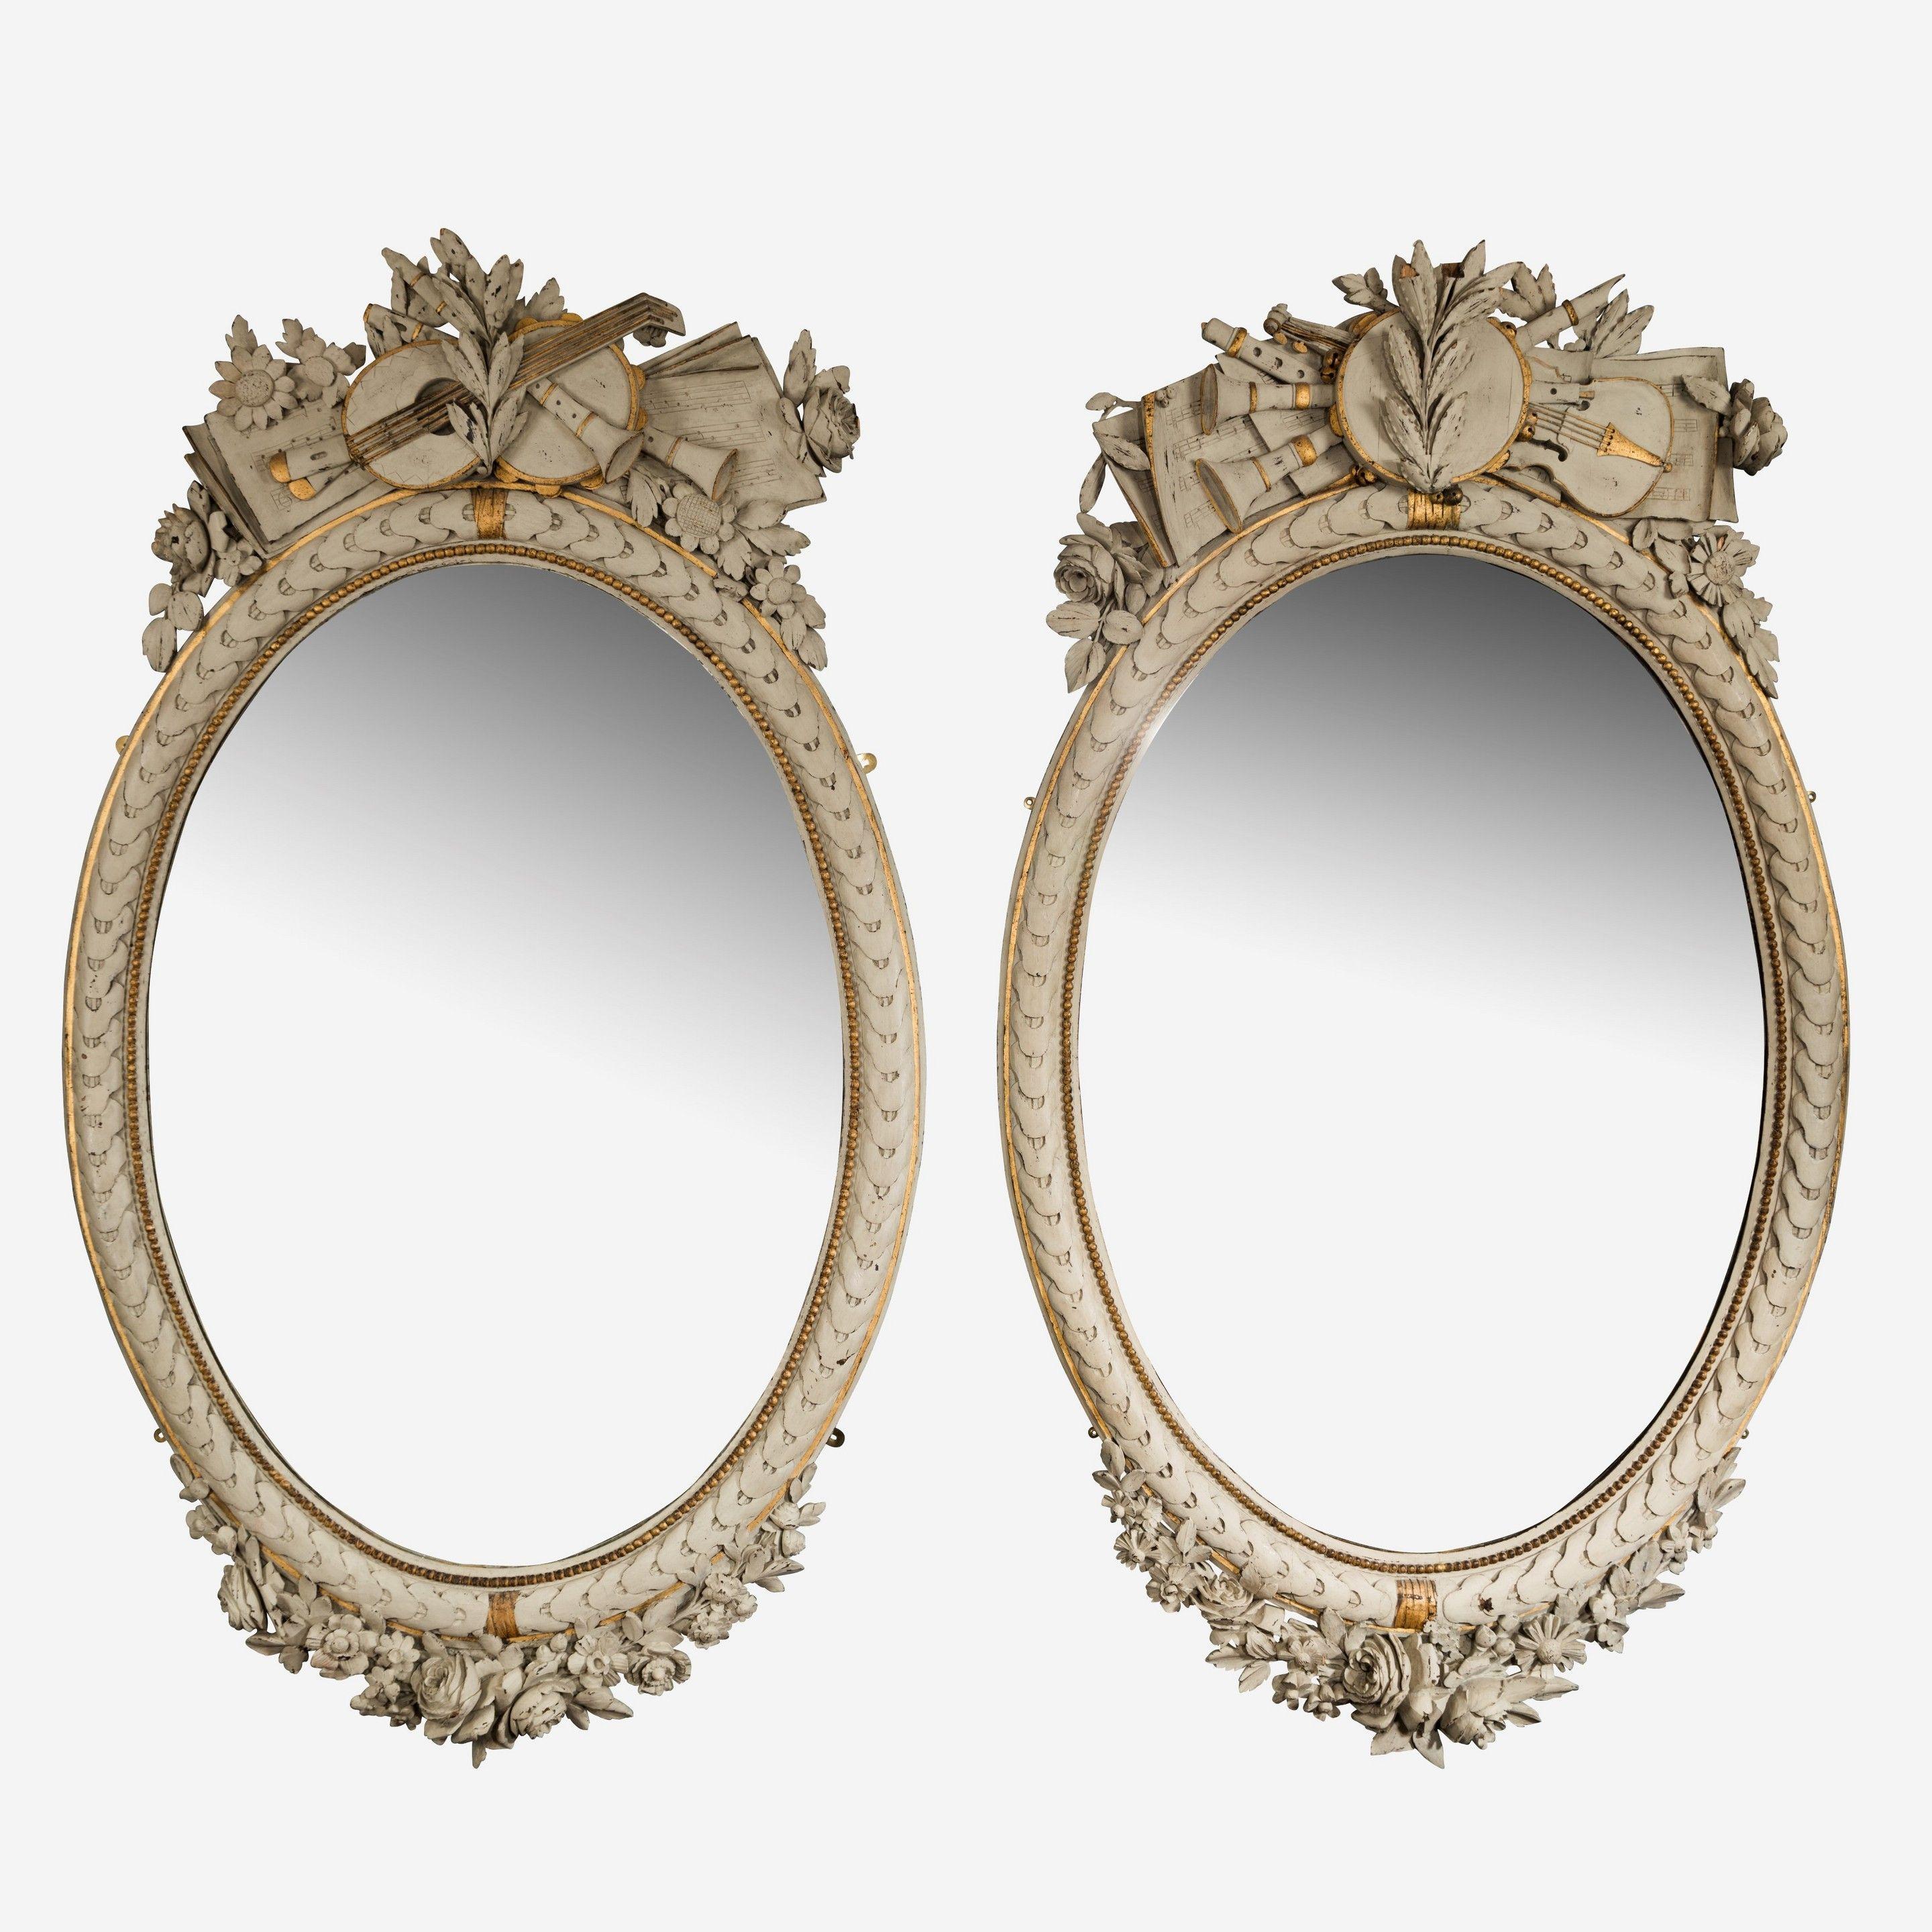 A large pair of handed Napoleon III French oval mirrors. The cresting carved in wood and representing the arts with sheet music and instruments.
